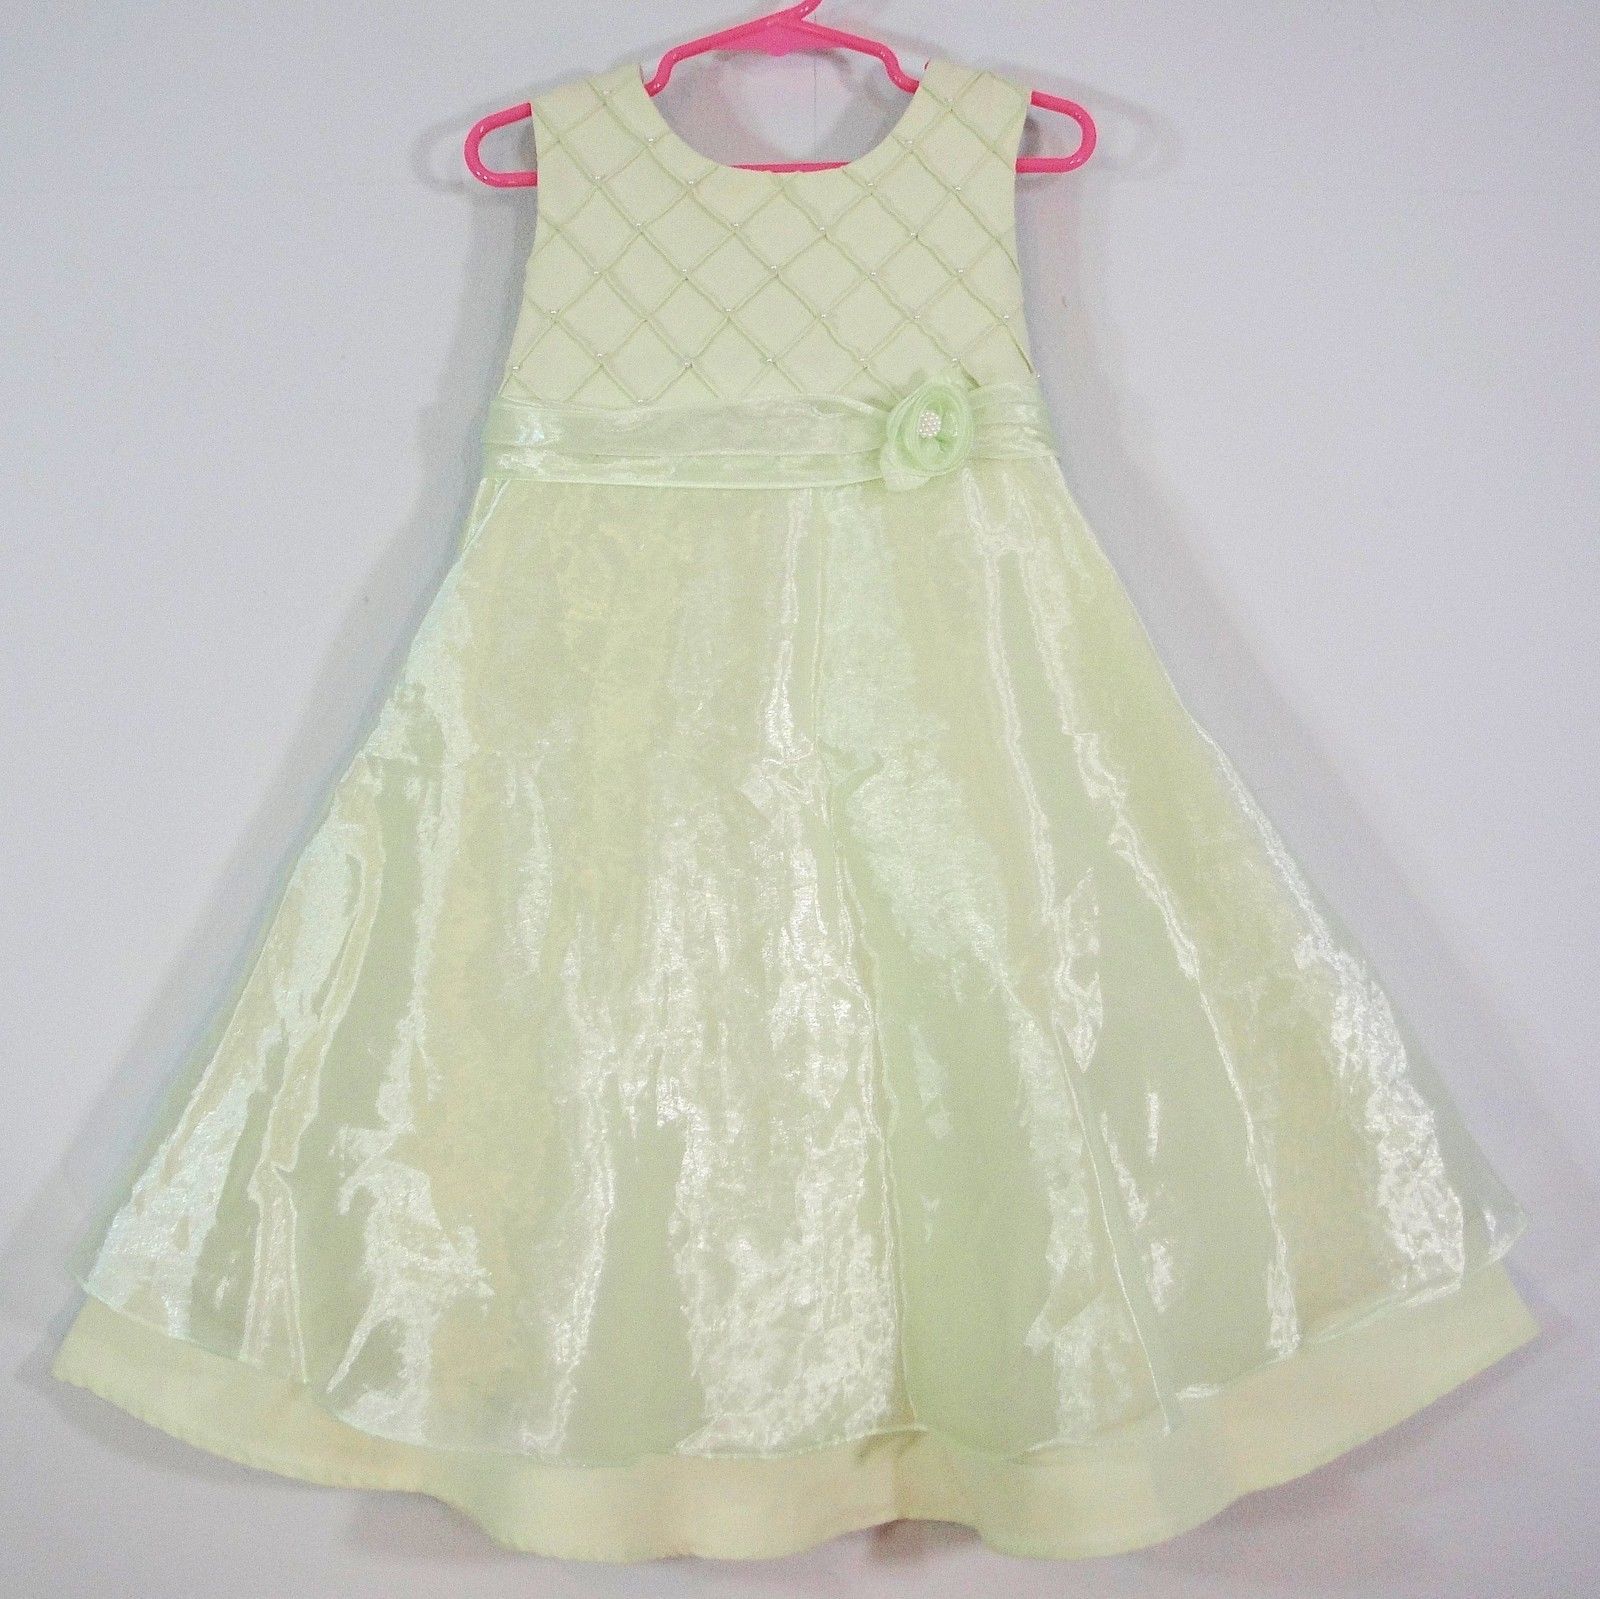 Primary image for Party Formal Easter Dress Mint Green Organza Overskirt Pearl Bead Bonnie Jean 5